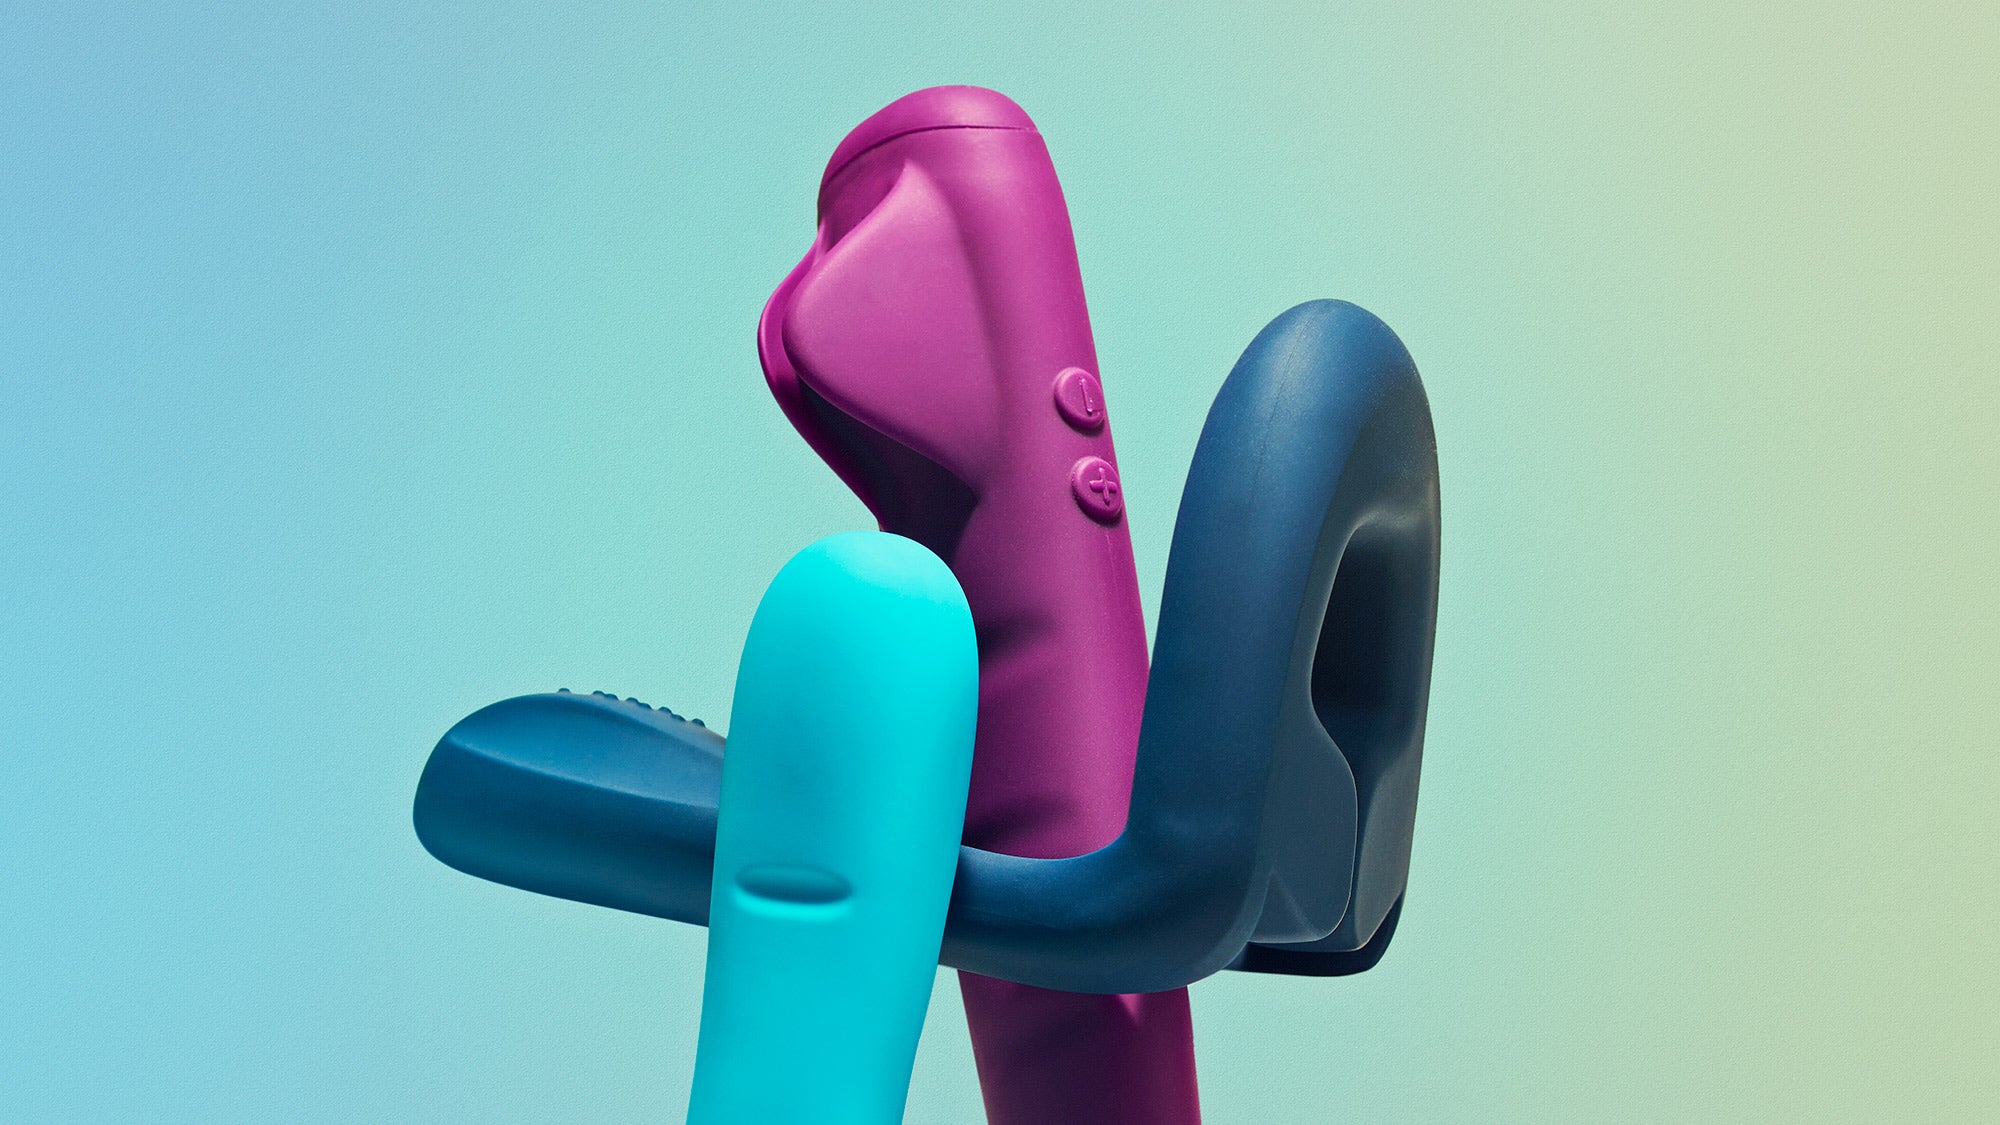 Sex toys engineered to be medical devices Popular Science